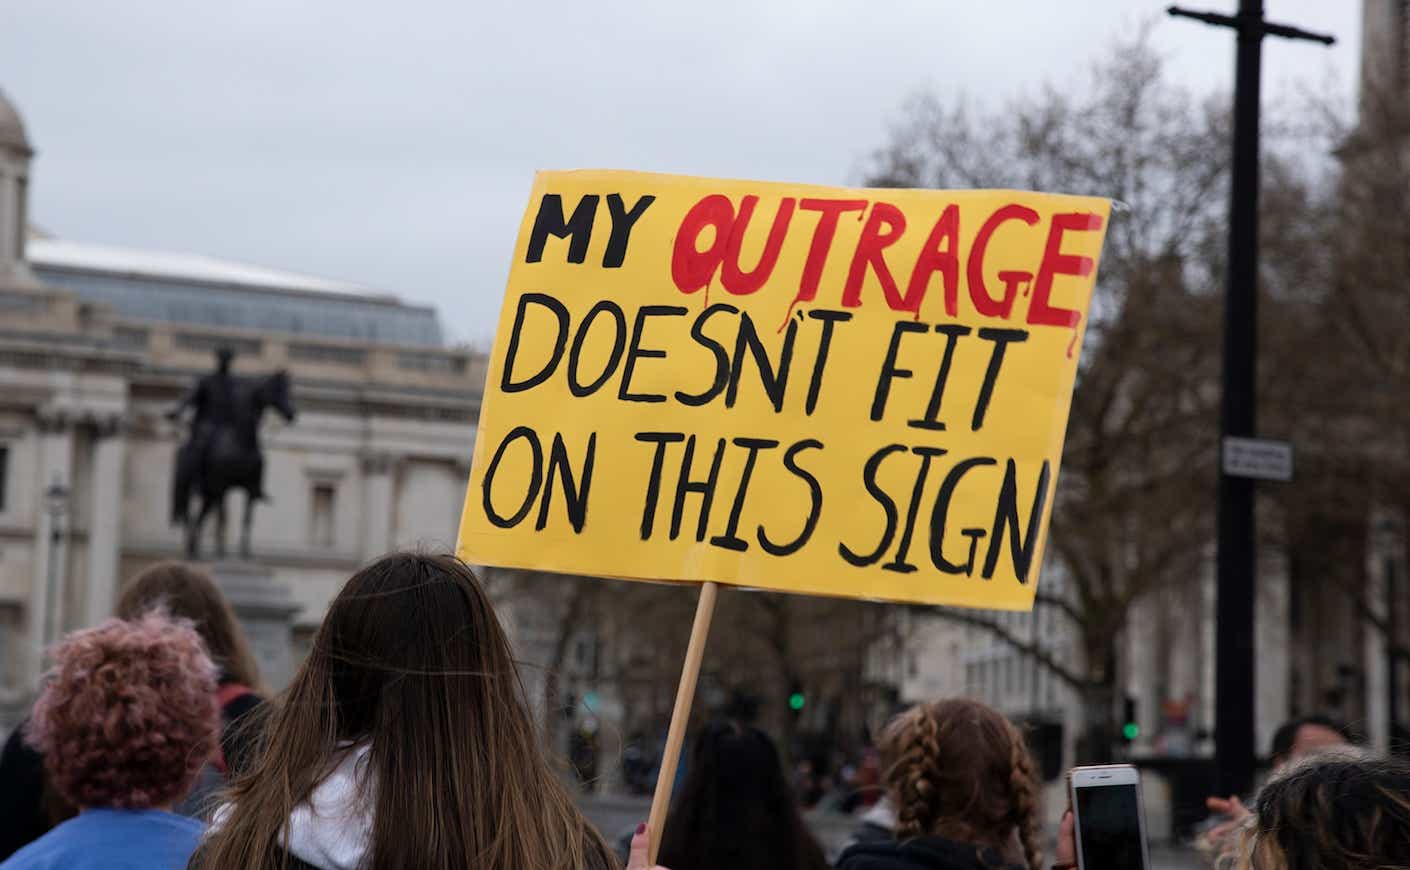 protestor holding a sign that says "my outrage doesnt fit on this sign"